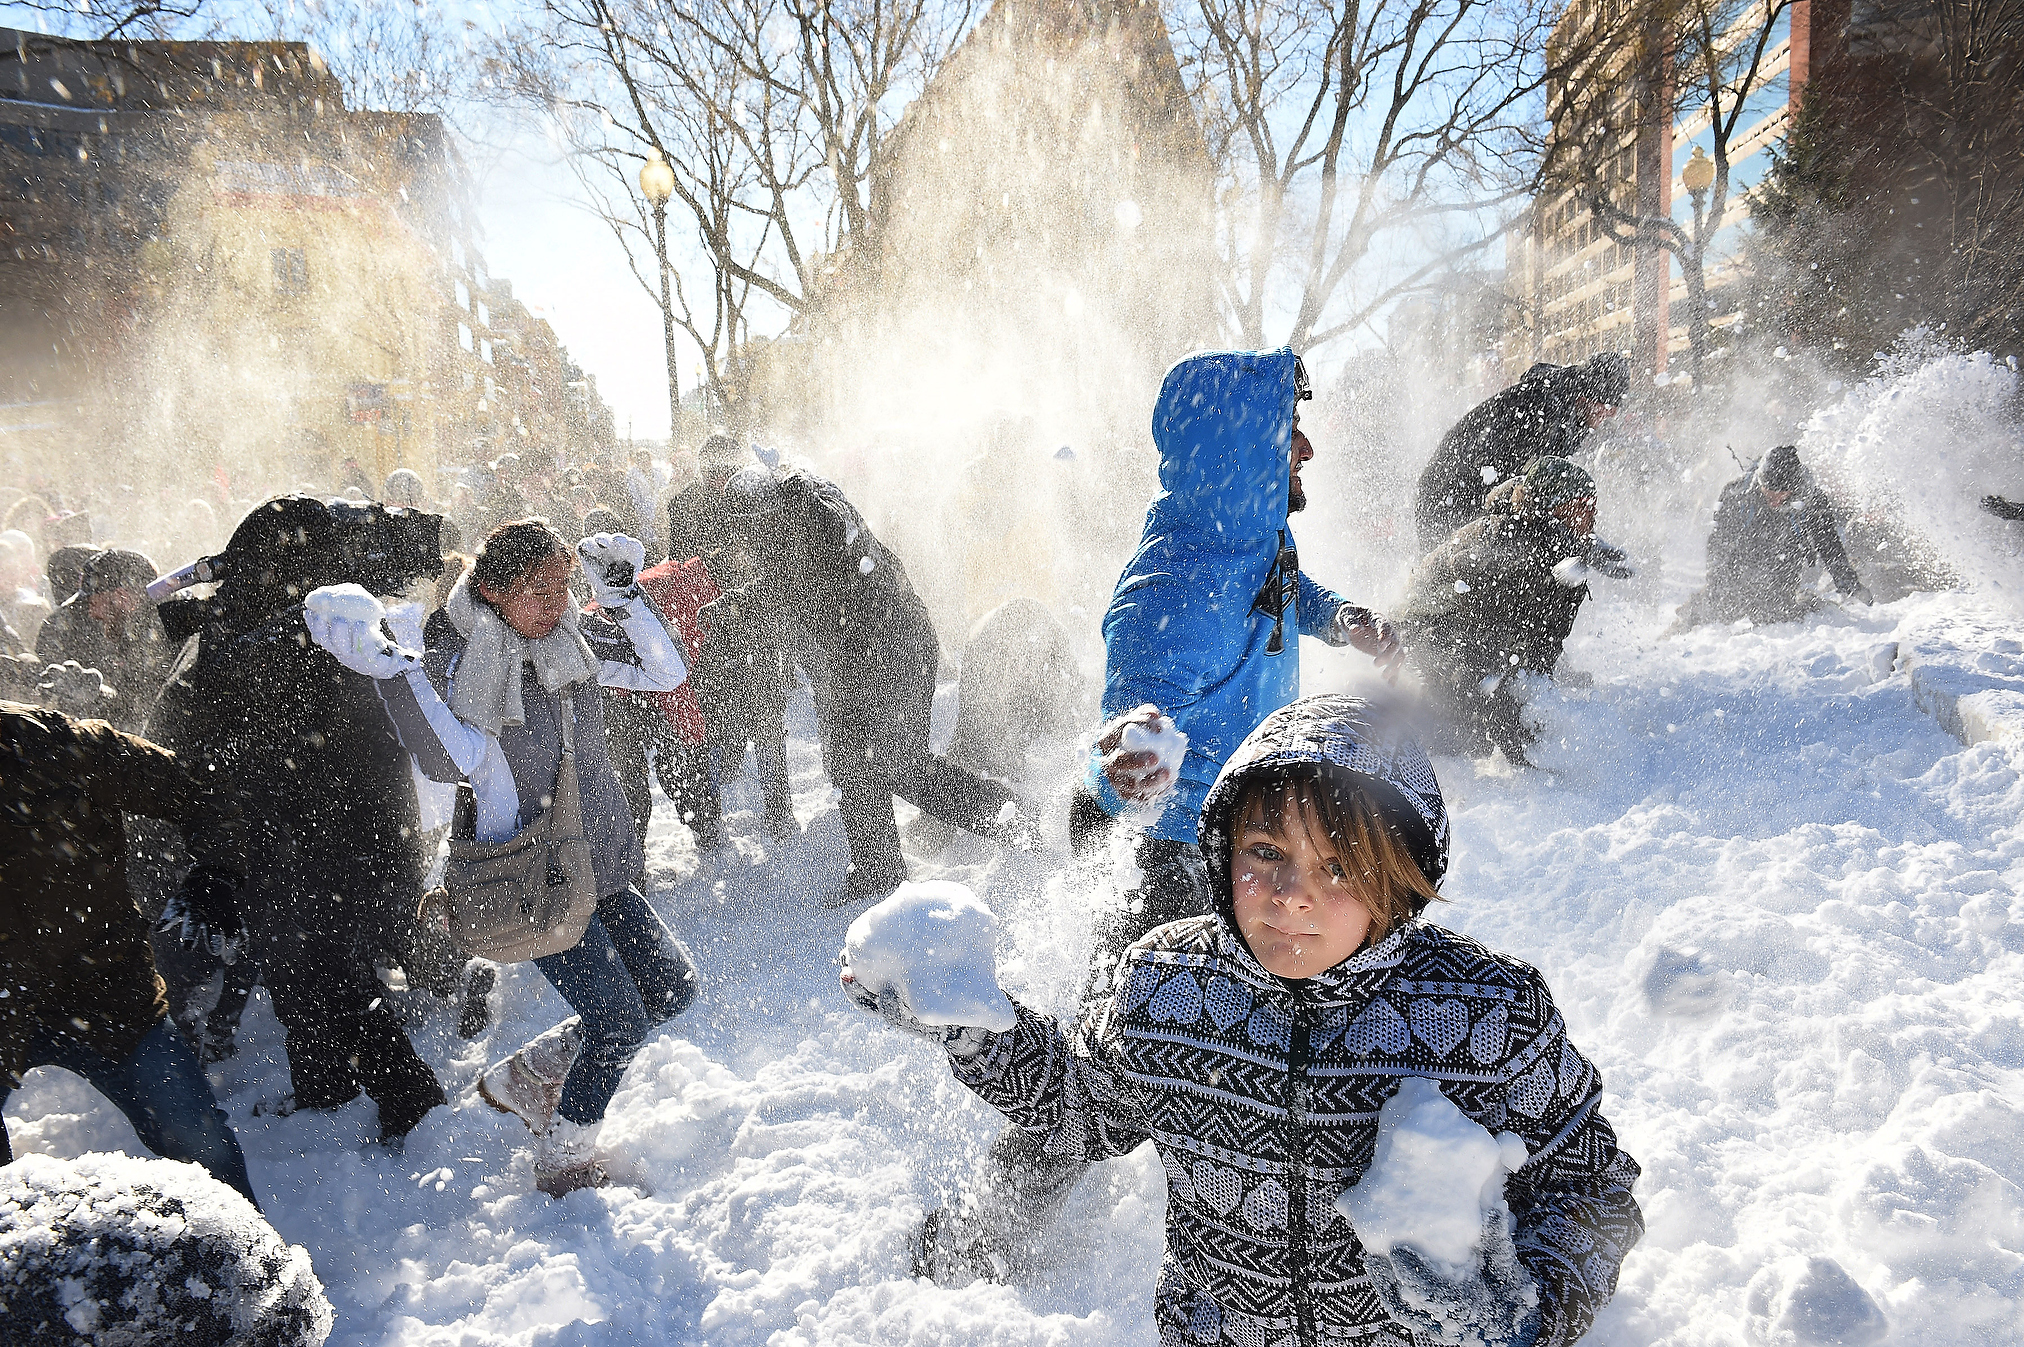 Gallery Photos of "Child In Snowball Fight In Winter Snow" .